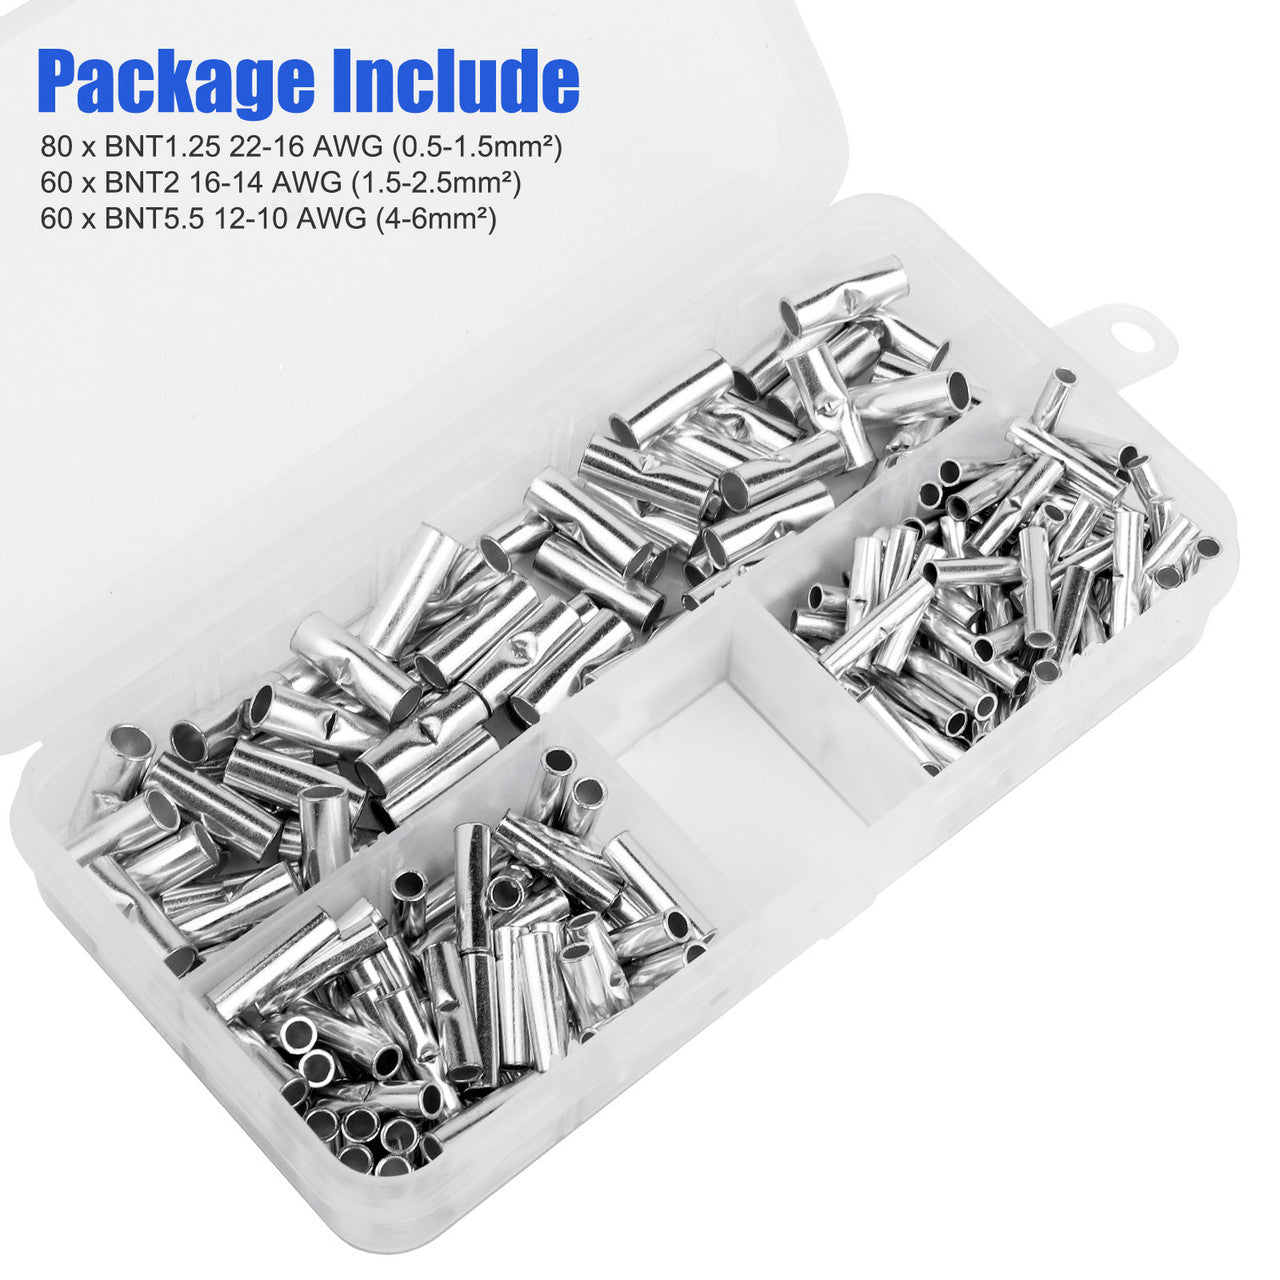 200 Pieces Copper Bare Wire Splice Terminals - The Wire Connectors Are Made of High Quality Copper, Tin Plated on the Surface, 10 -12 Awg / 14 -16 Awg / 18 - 22 Awg